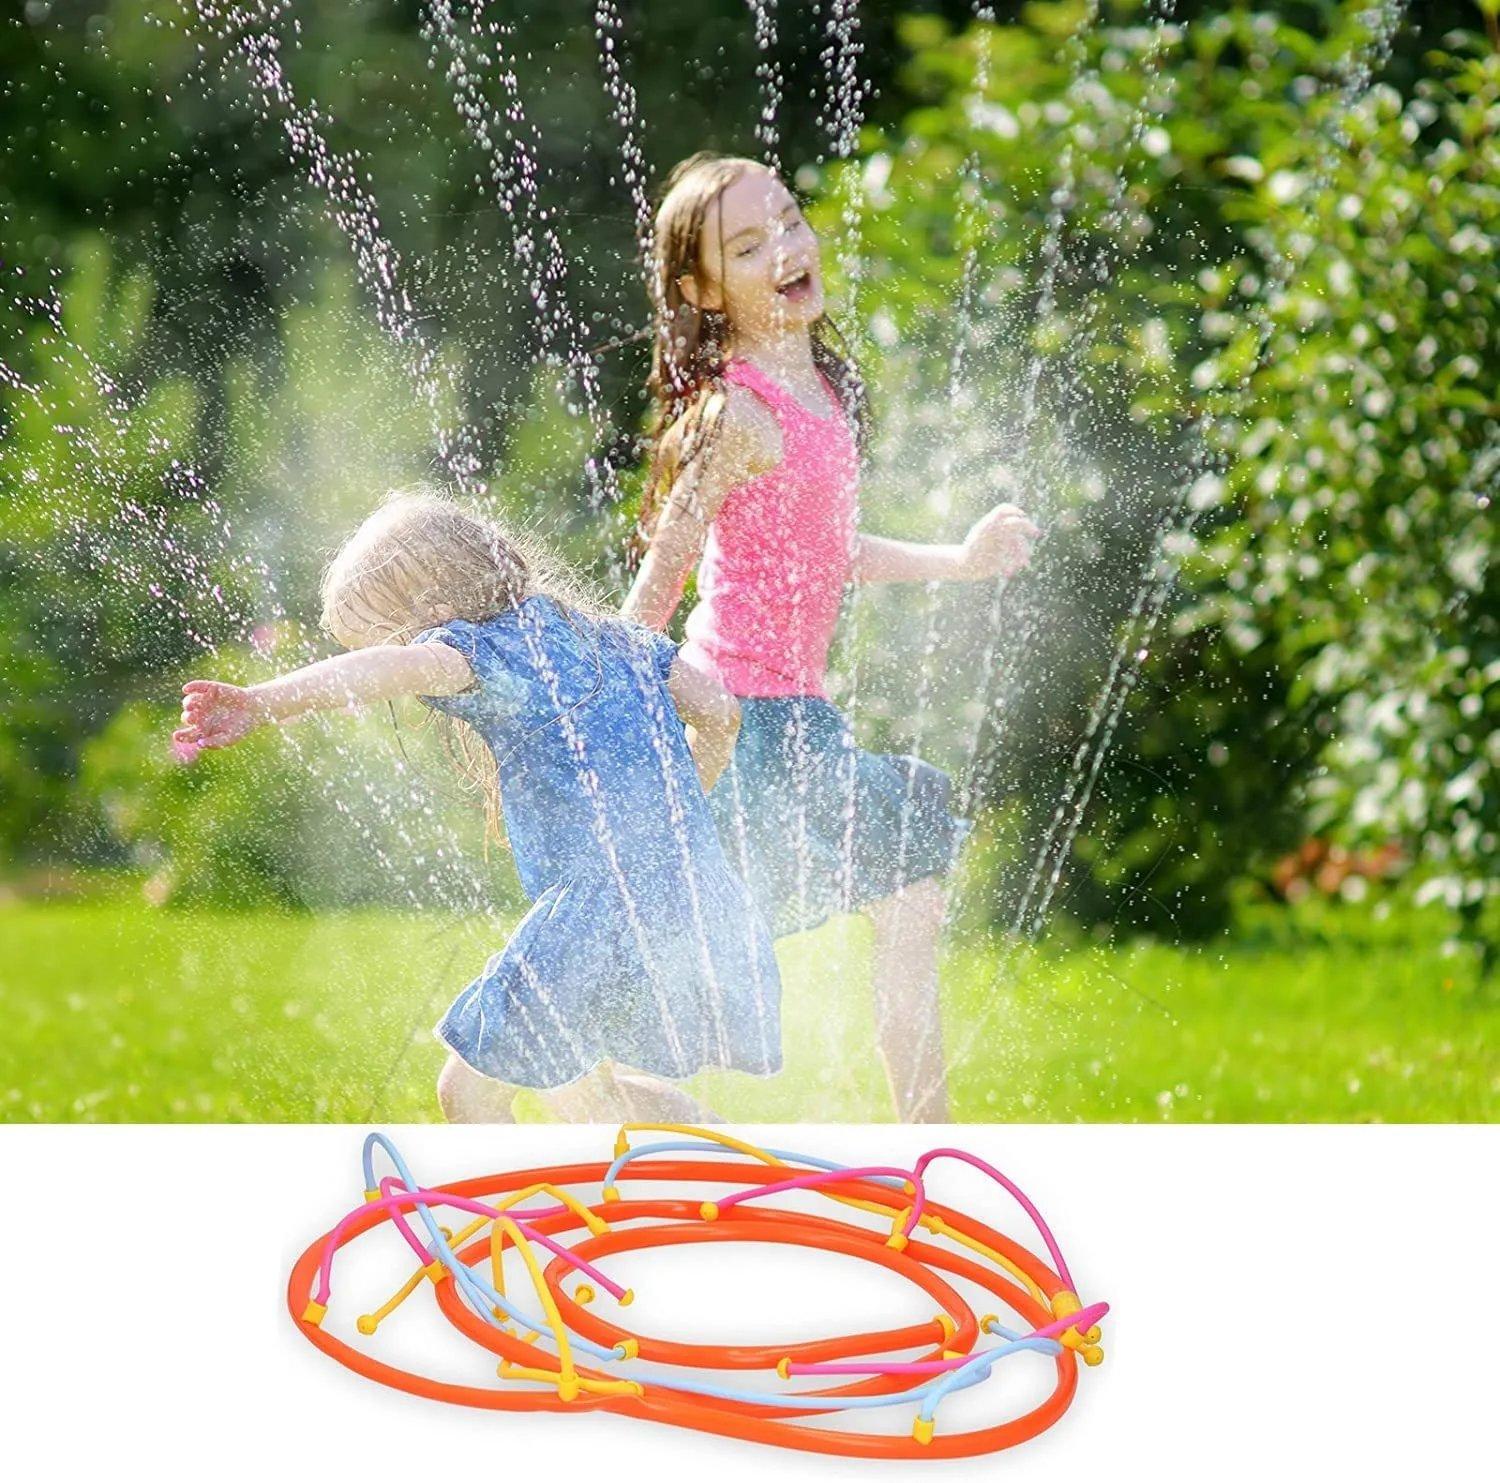 Colourful Garden Water Sprinkler Noodle Hose Pipe Summer Outdoor Play Toys for Children